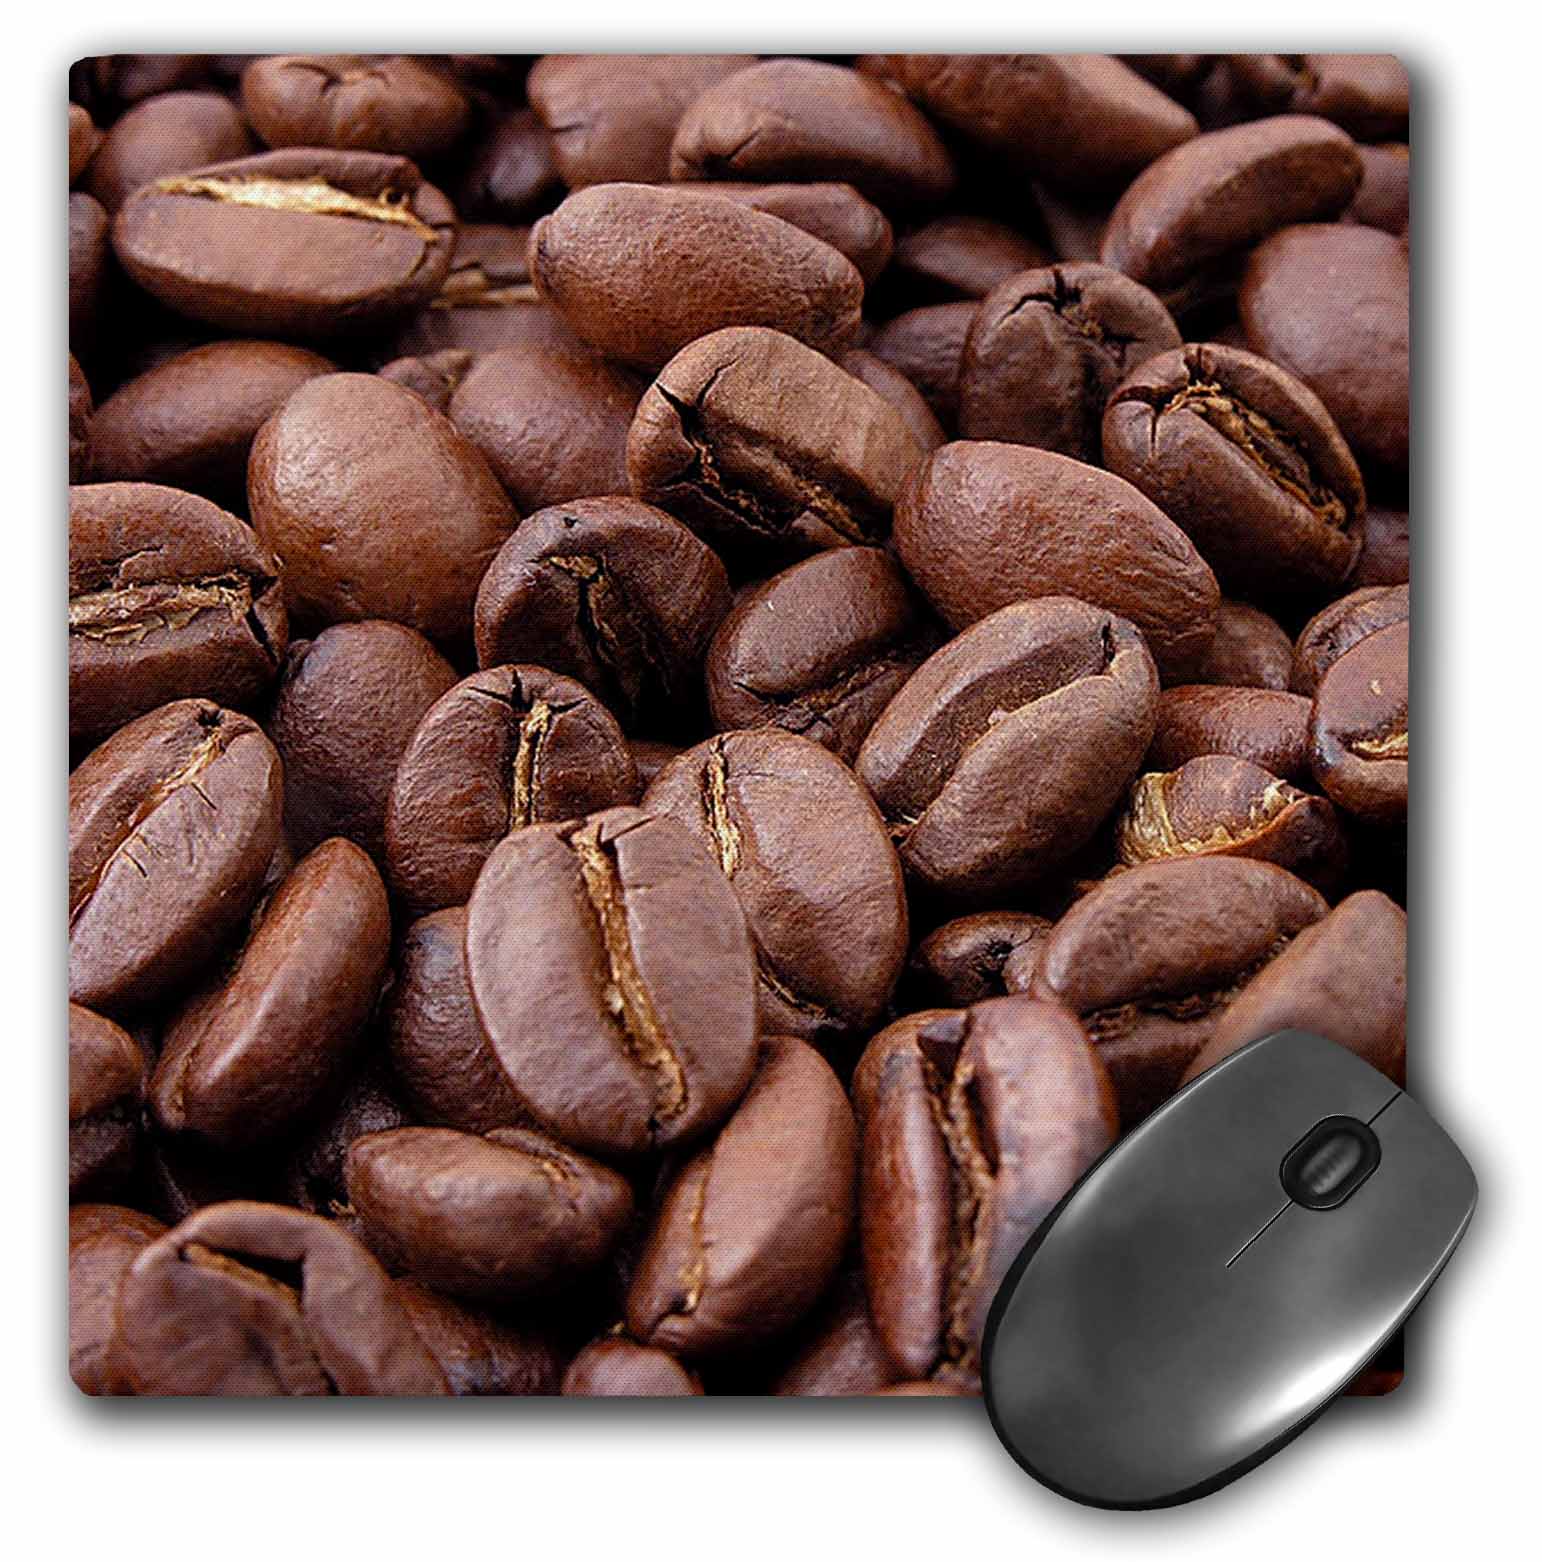 3dRose Coffee Beans - coffee, coffee beans, kitchen art, coffee seeds, roasted beans, roasted coffee beans, Mouse Pad, 8 by 8 inches - image 1 of 1